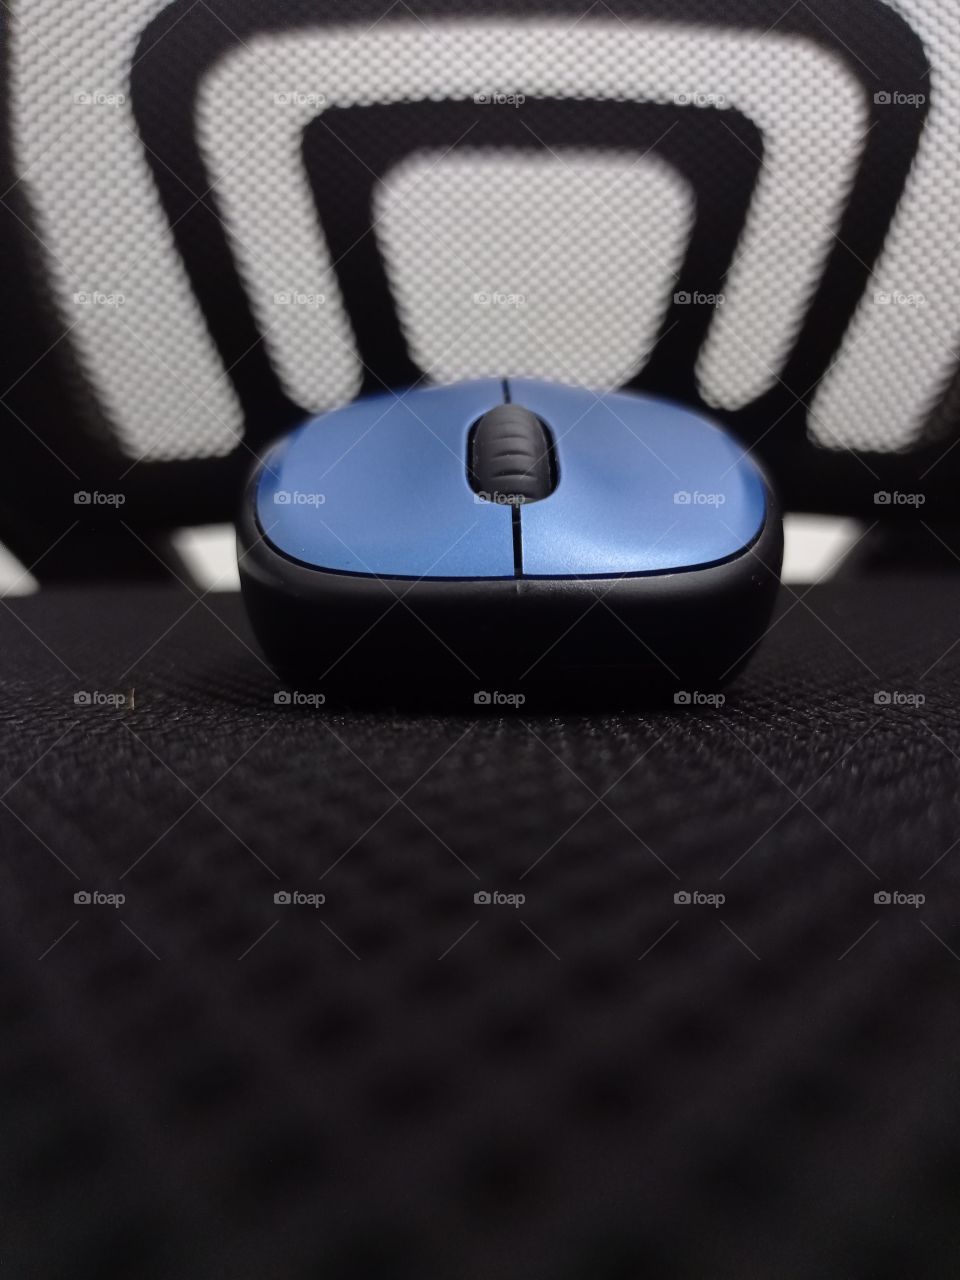 the computer mouse perspective